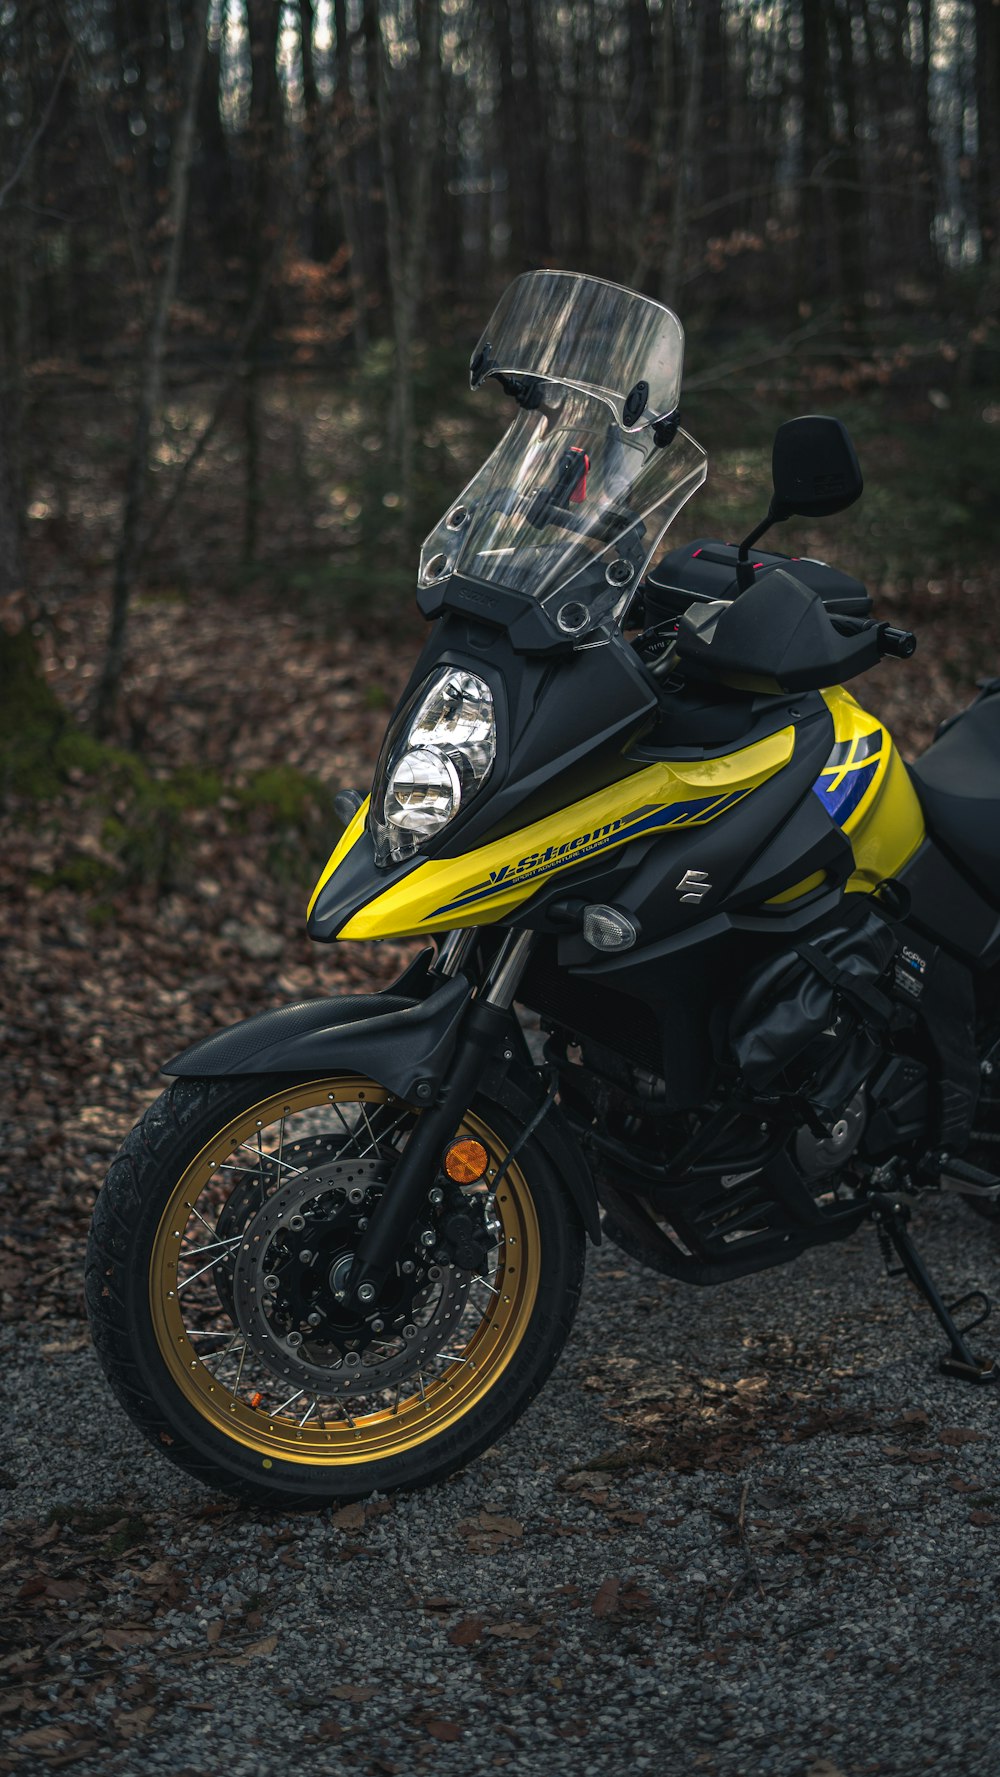 a yellow and black motorcycle parked in a wooded area